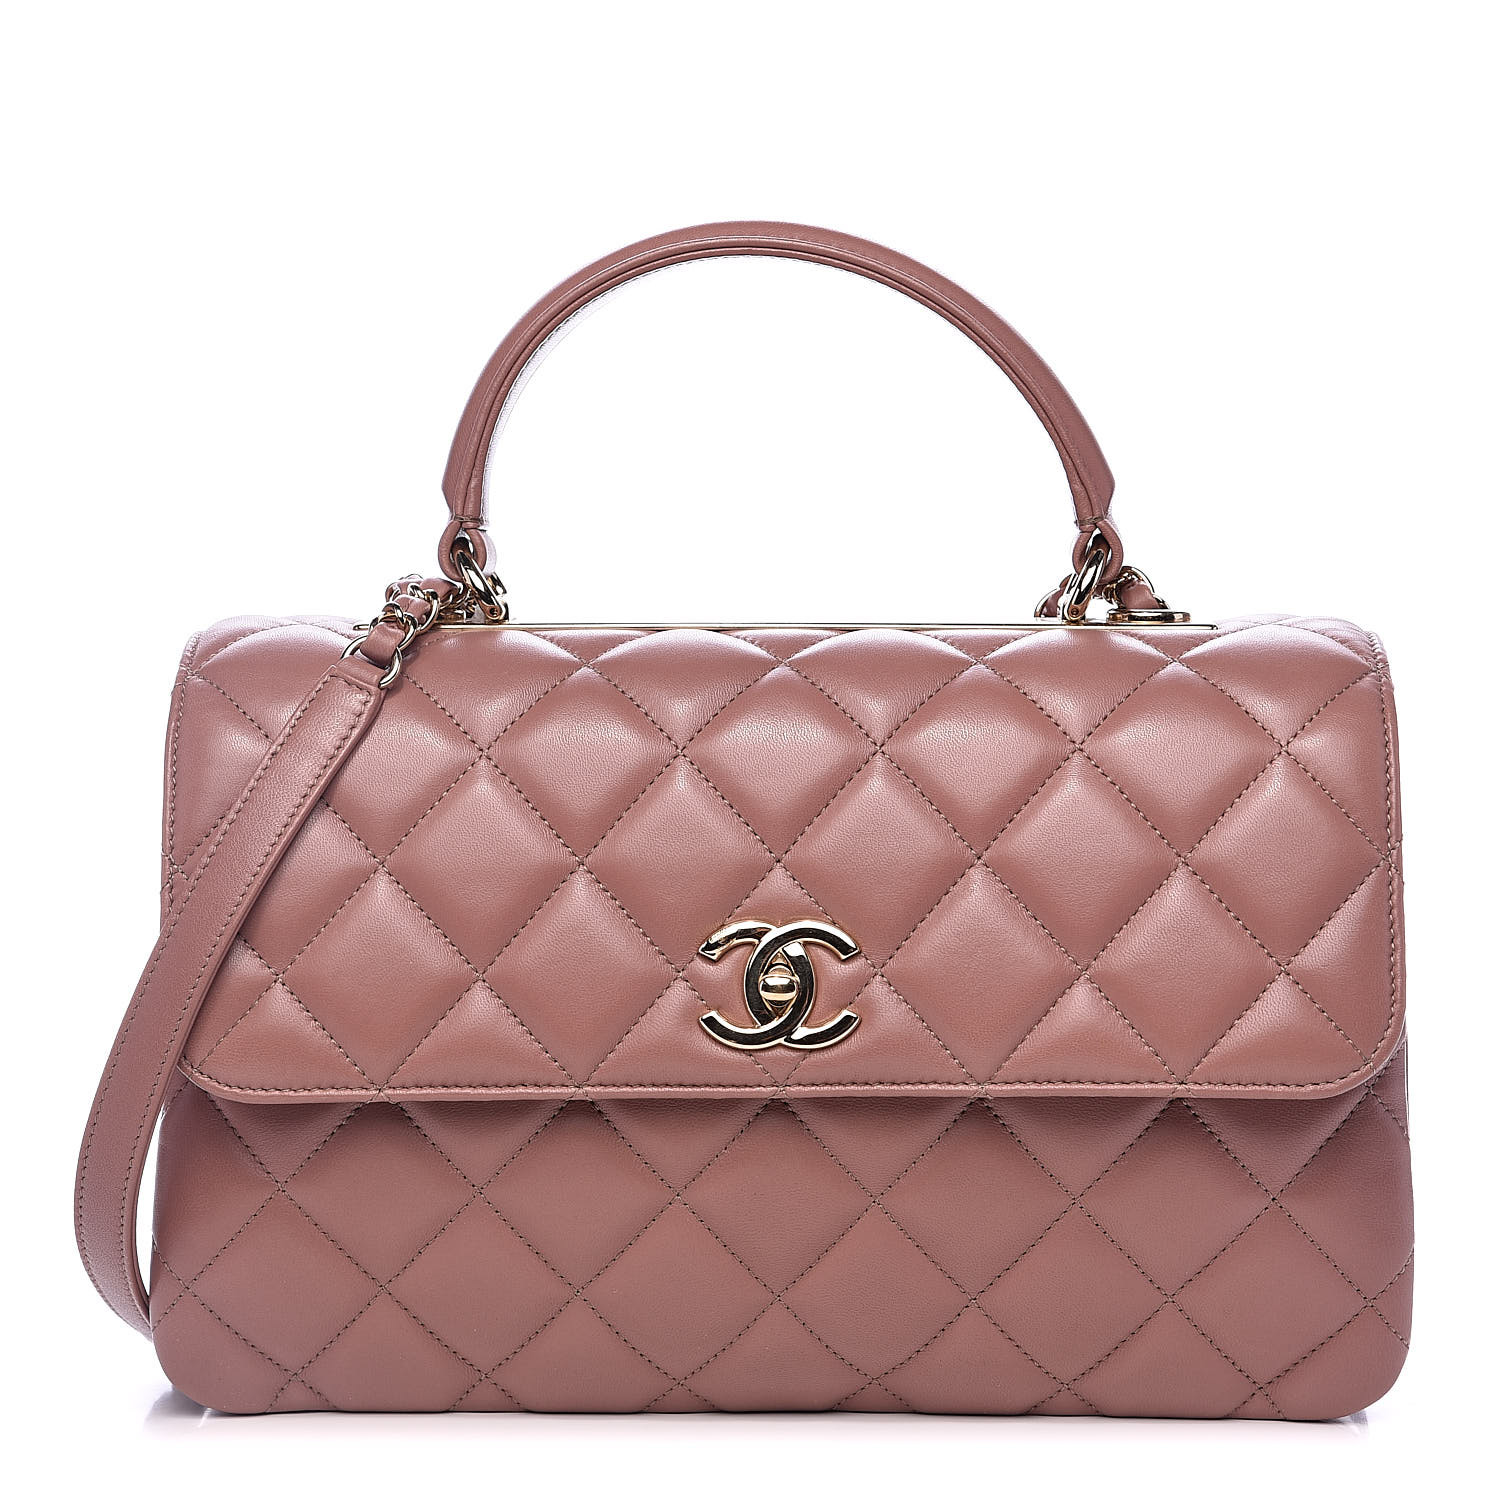 CHANEL Lambskin Quilted Medium Trendy CC Flap Dual Handle Bag Pink 514248